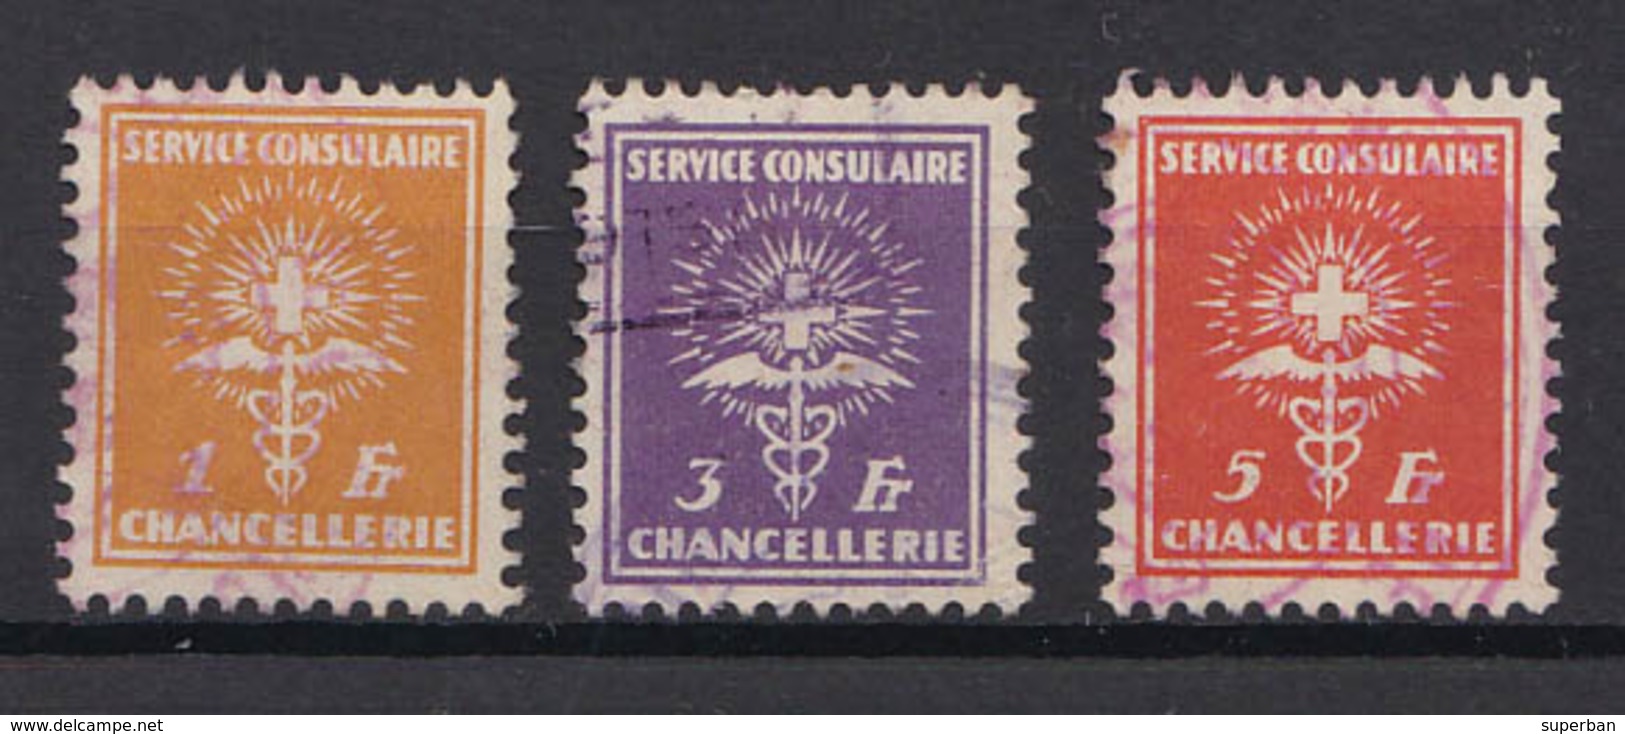 HELVETIA : 3 TIMBRES OBLITÉRÉS / 3 USED STAMPS : SERVICE CONSULAIRE : 1 Fr. / 3 Fr. / 5 Fr. (aa112) - Fiscaux